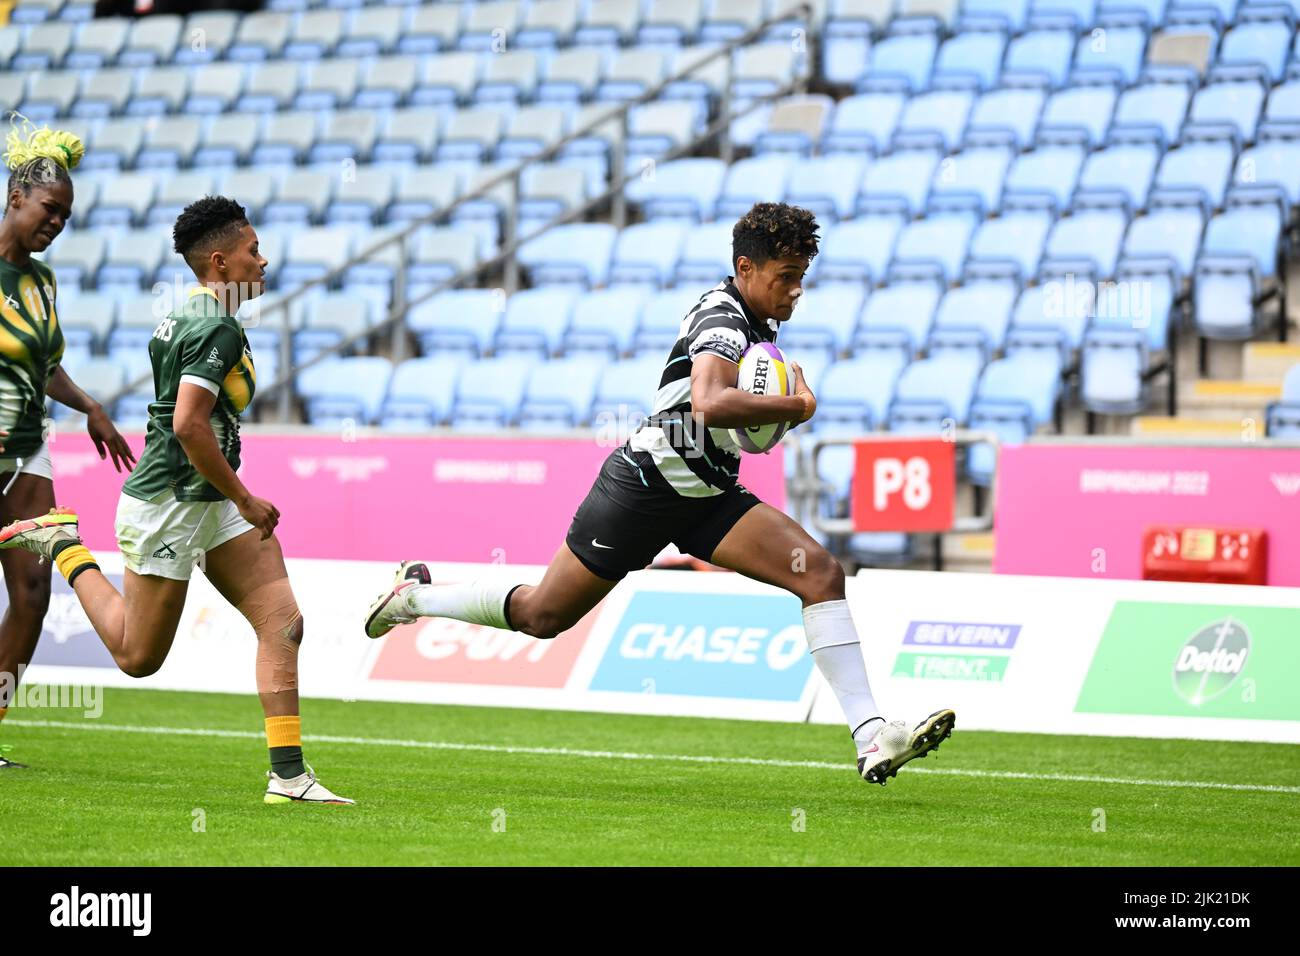 Sesenieli Donu of Fiji scores a try during the Rugby Sevens at the Commonwealth Games at